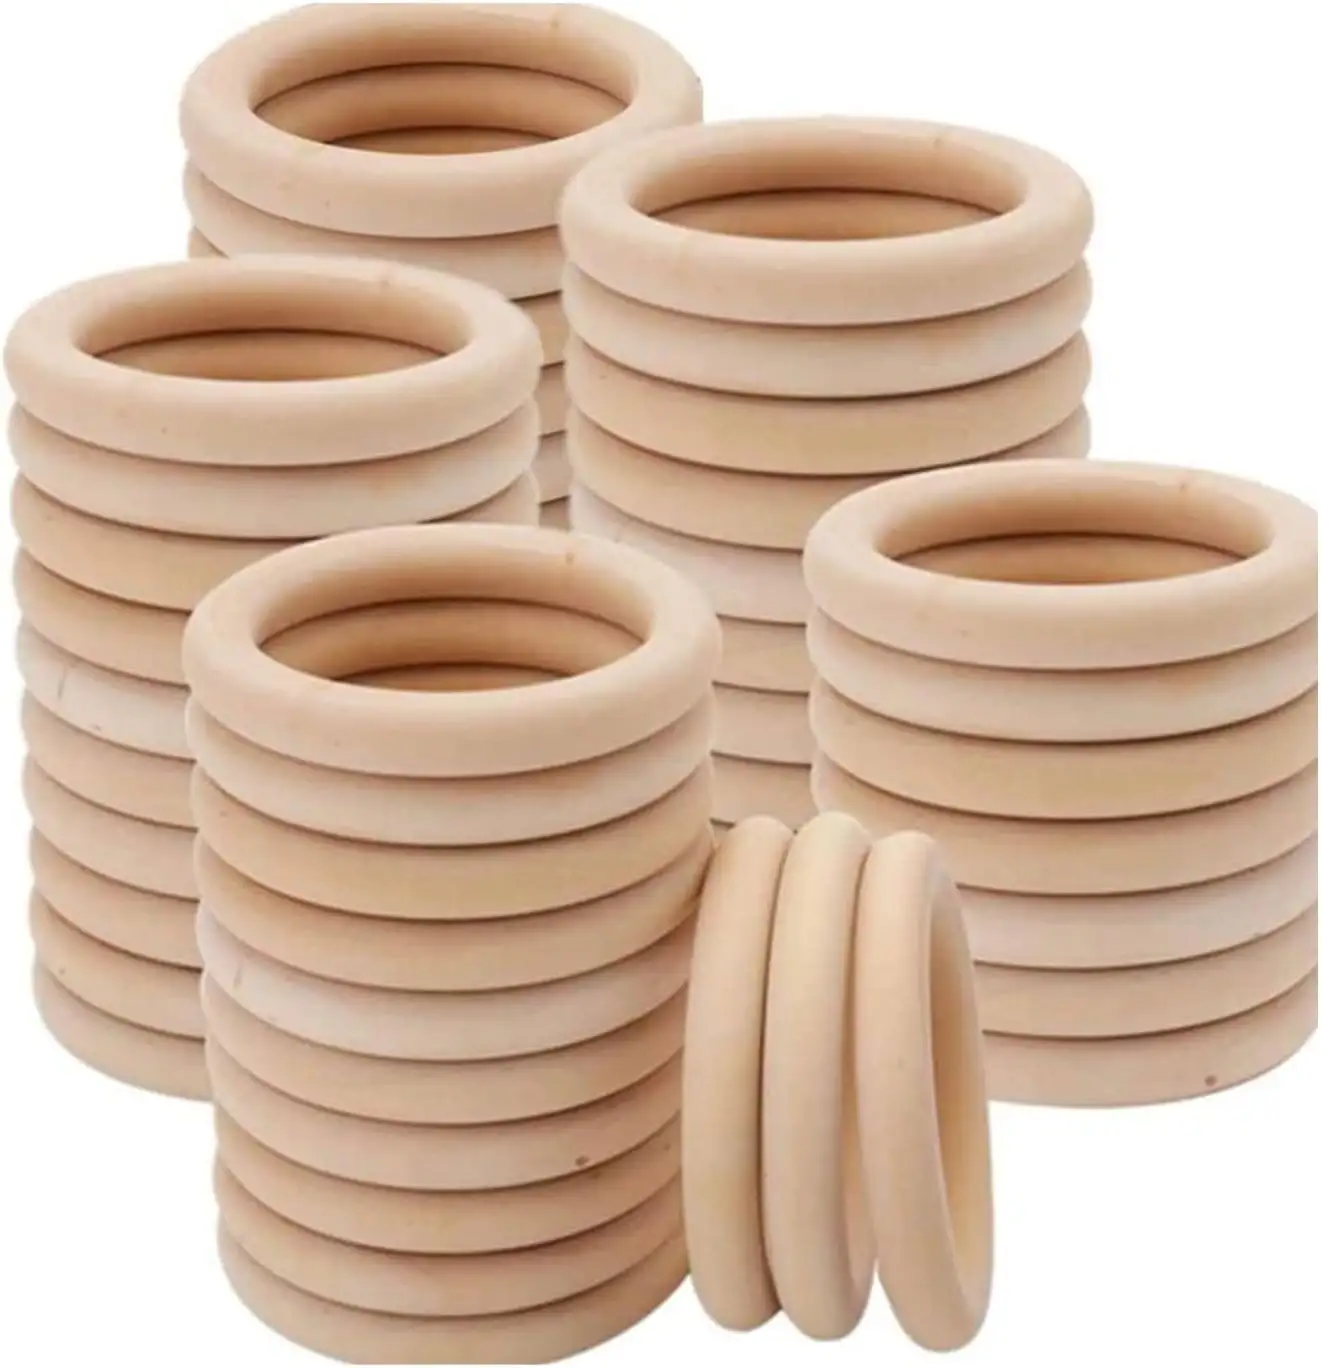 Wooden Rings Natural Wood Rings Without Paint Smooth Unfinished Wood Circles for Craft DIY Baby Teething Ring Pendant Connectors